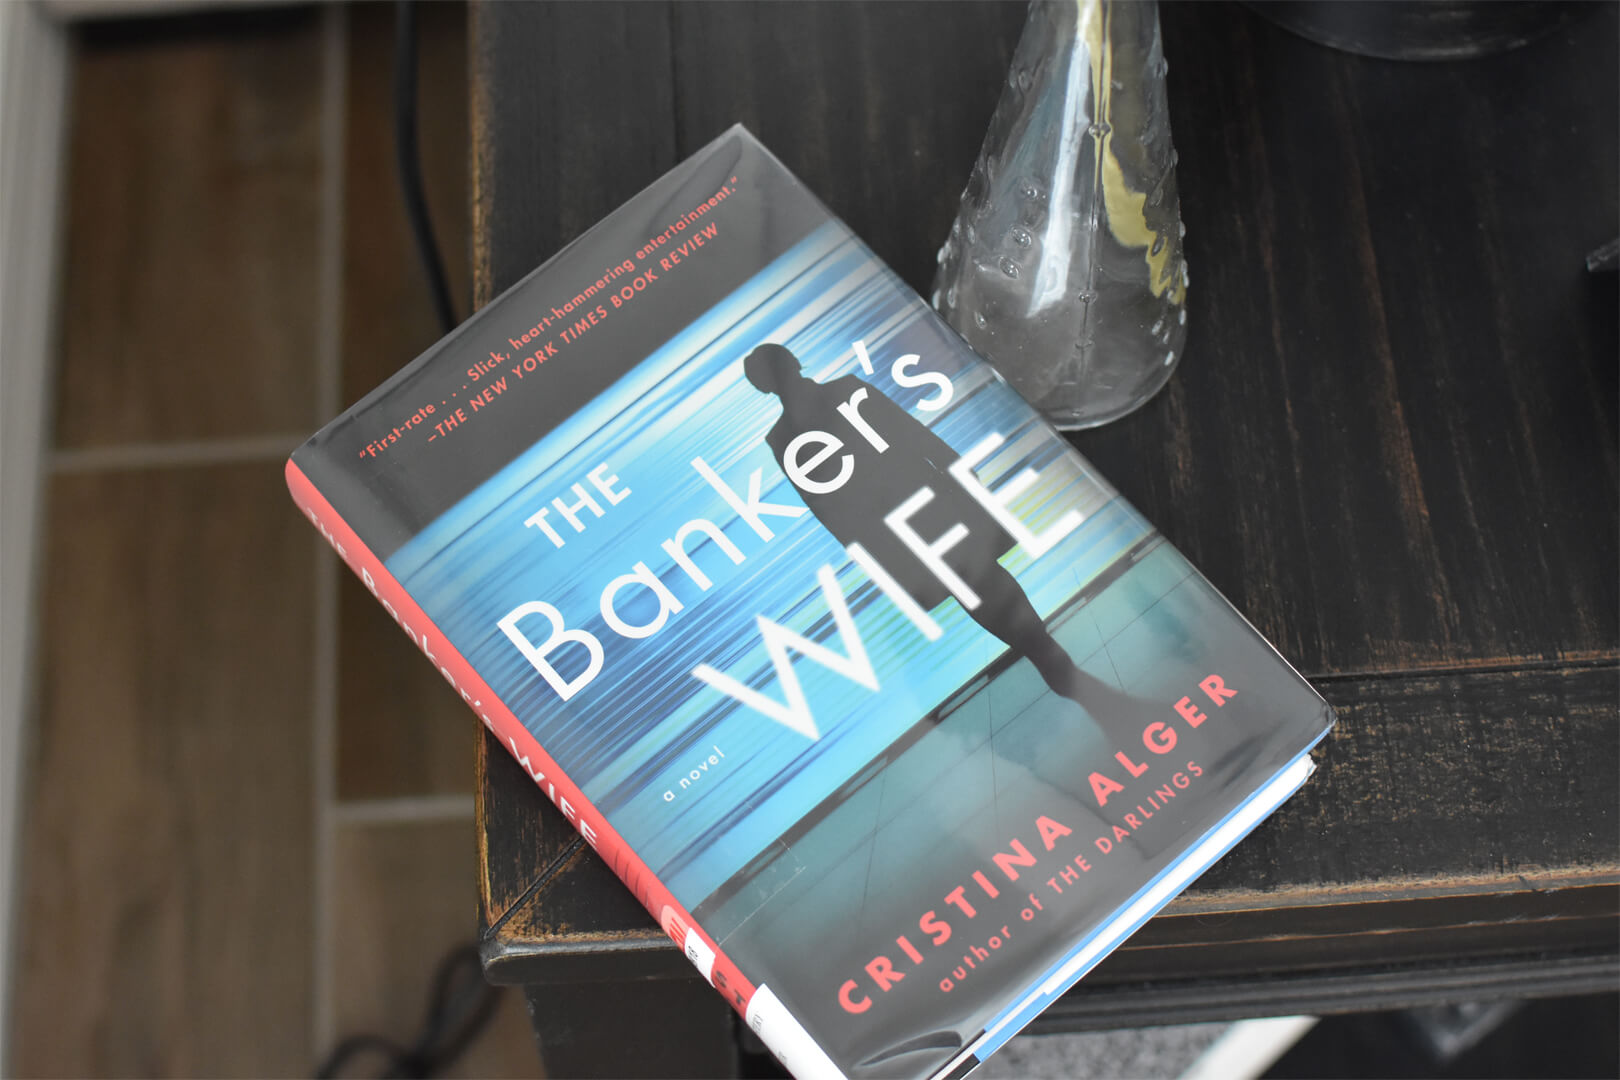 Preview: The Banker’s Wife by Cristina Alger